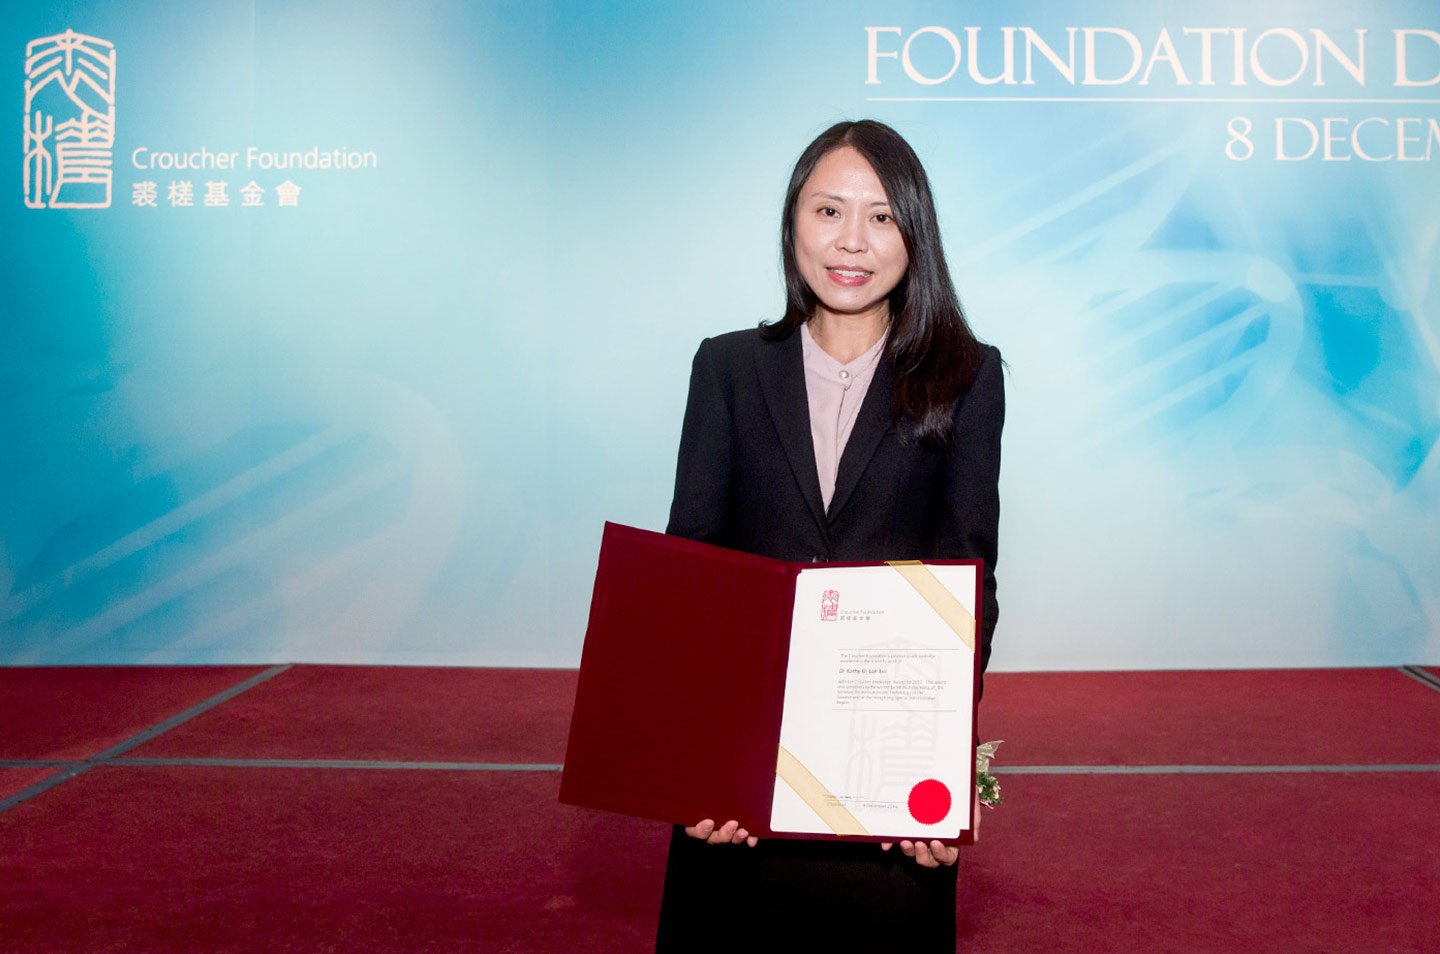 Professor Lui receives the Croucher Innovation Award 2017, for her distinguished accomplishment in the international scientific community